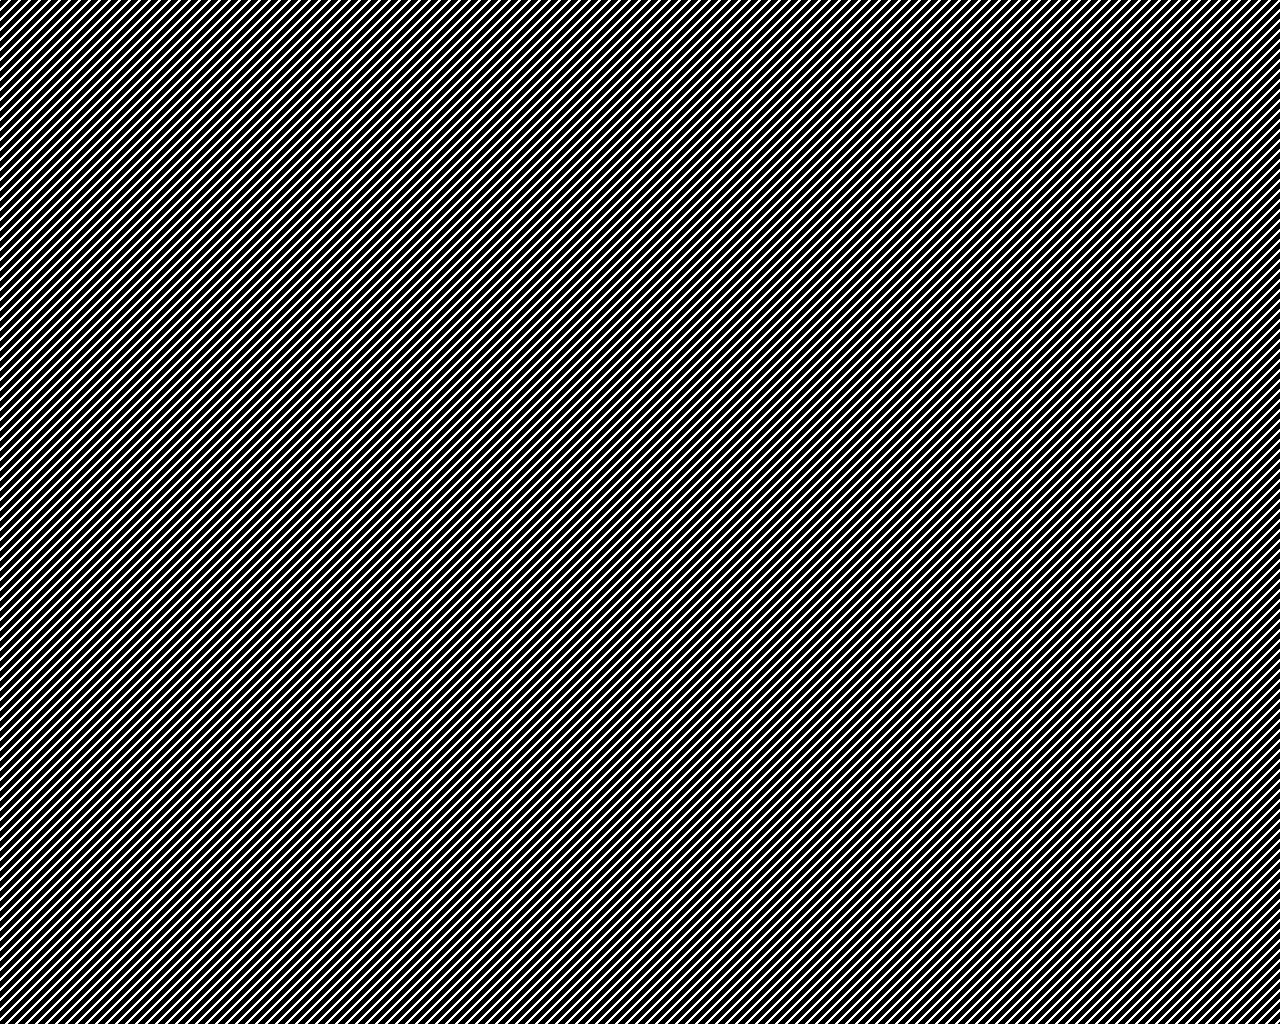 I contest to you if you stare at this long enough your brain will melt.  Extra Points if you can set a .gif as your wallpaper, and you use this.